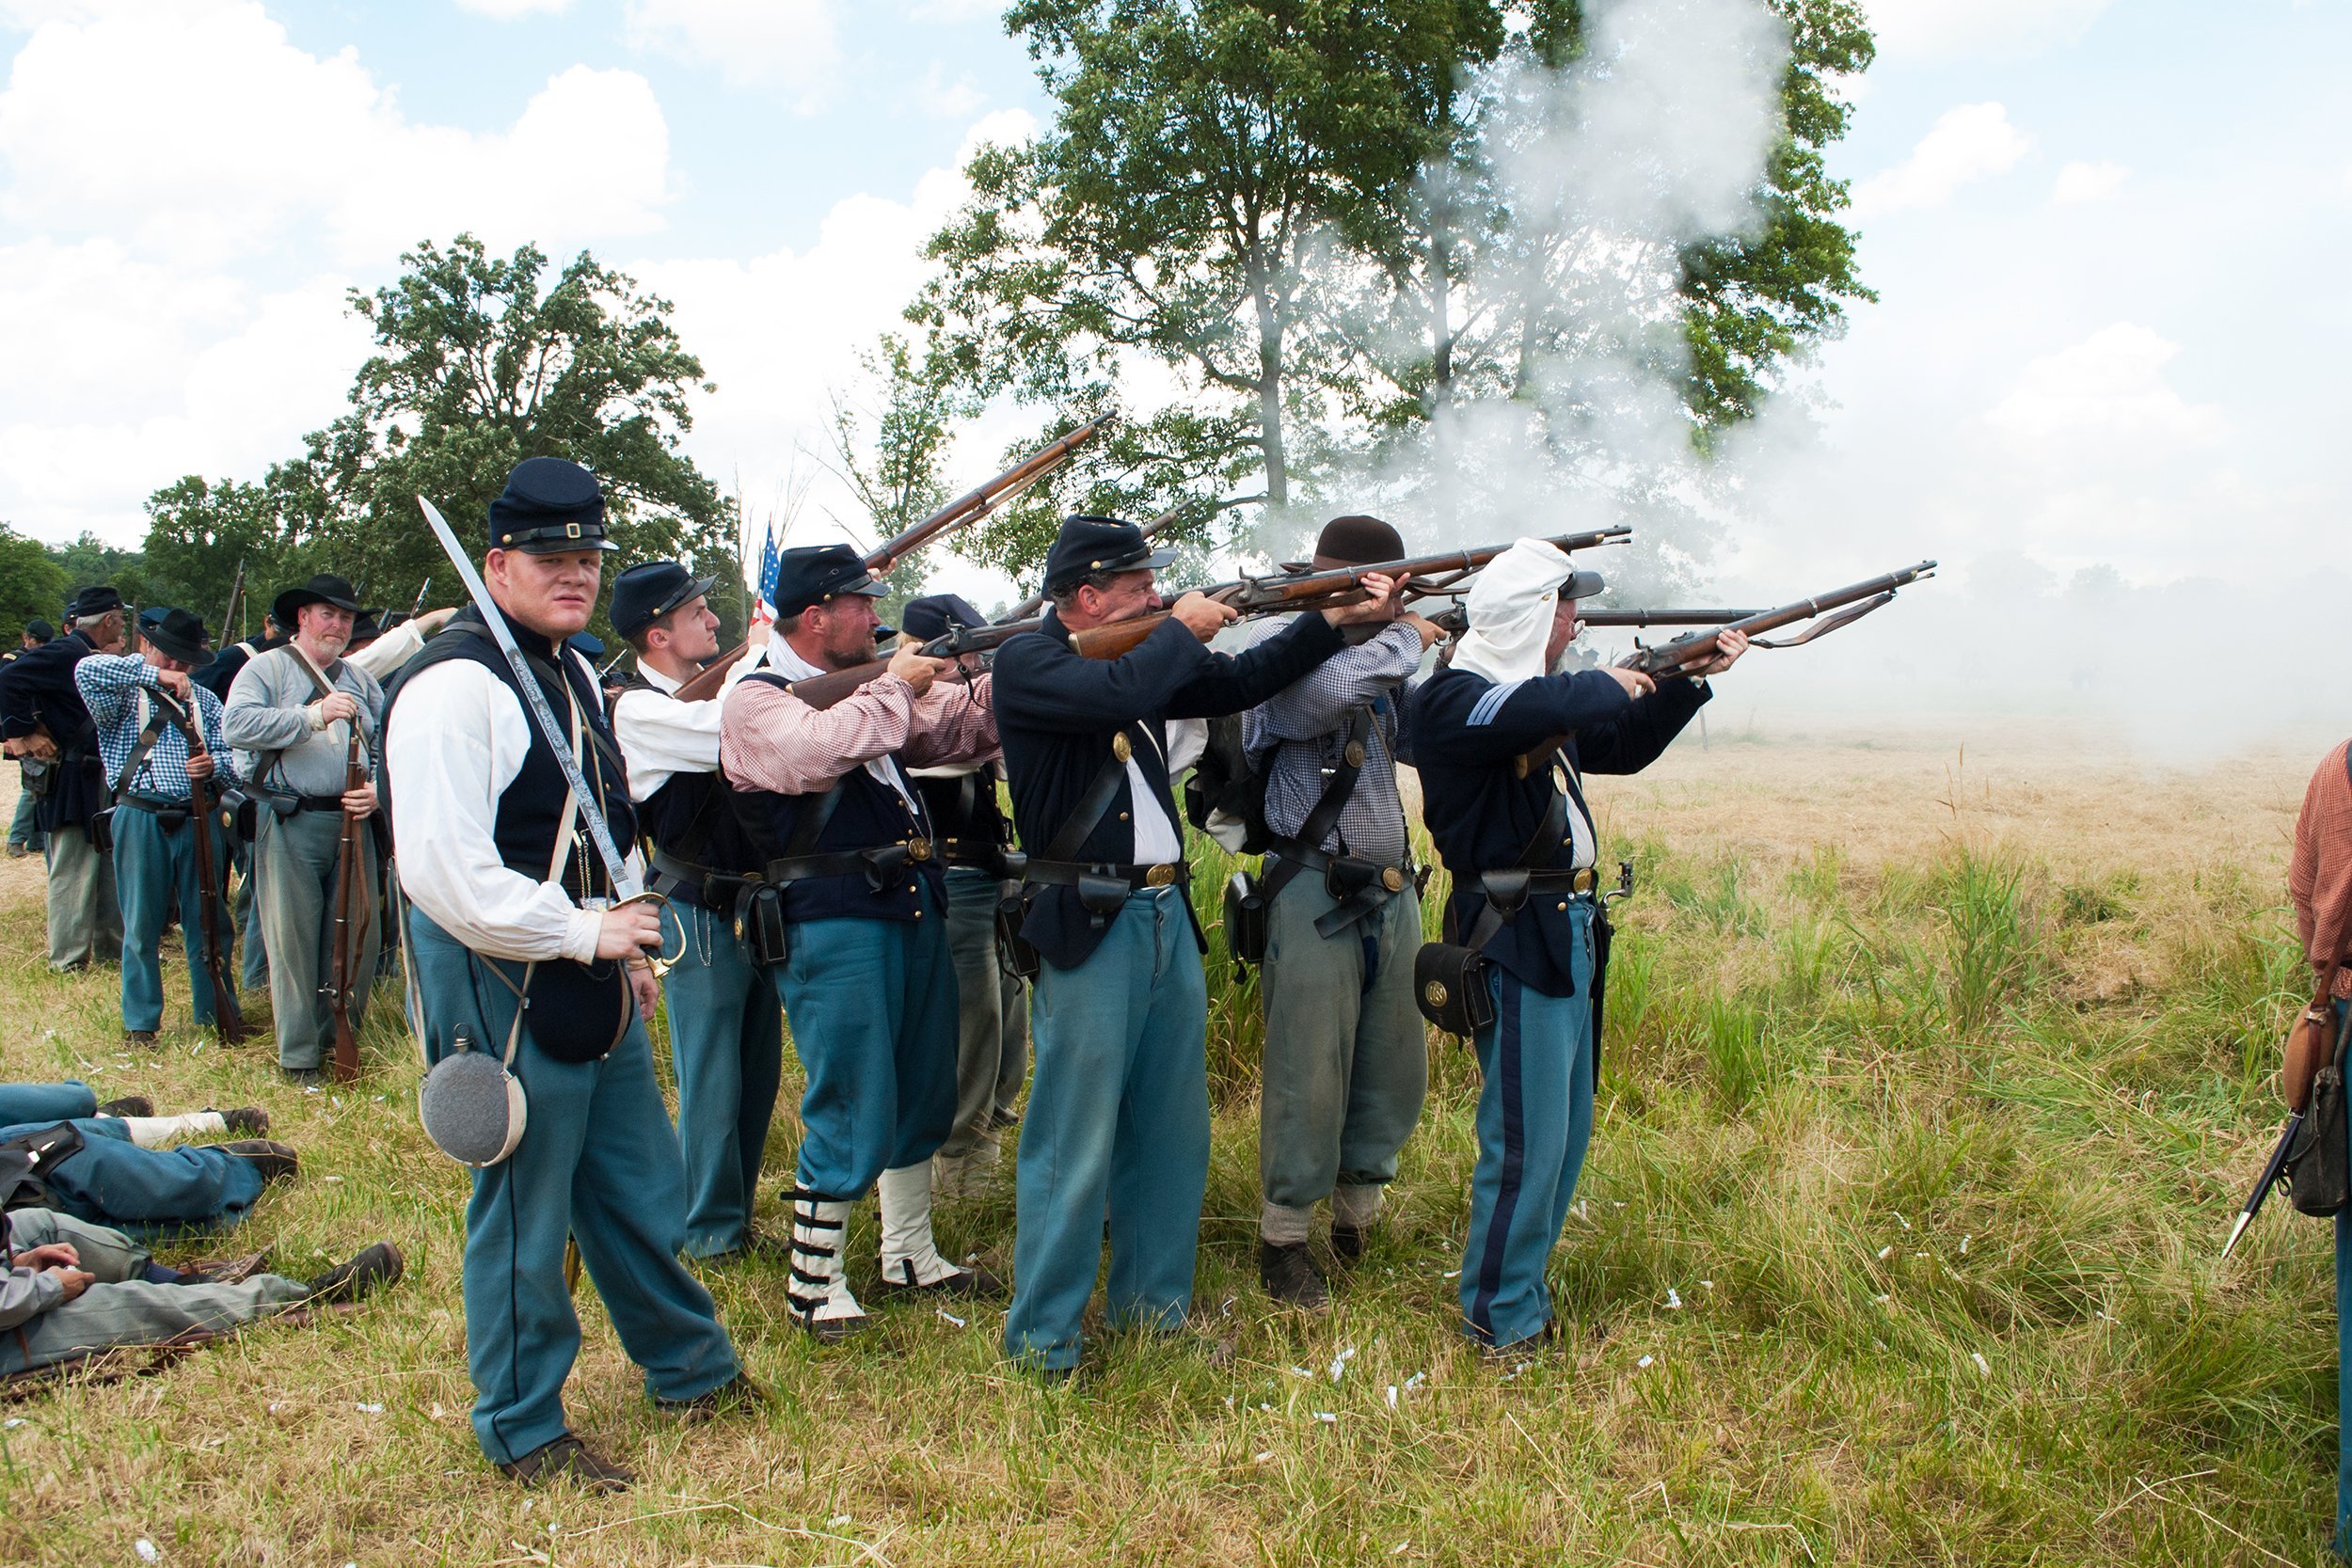 <p><strong>Location:</strong> Gettysburg, Pennsylvania <br><strong>Era:</strong> Mid-1800s (Civil War) <br><strong>What to do:</strong> After you've seen Gettysburg National Military Park, the elaborate Gettysburg Anniversary Committee re-enactment awaits. Held every year in July, it features<a href="https://www.gbpa.org/event/2022-battle-gettysburg"> different battles</a> and a living history area filled with re-enactors in period dress. <br><strong>Cost:</strong> Starting at $25 for adults; $5 for children; 10 and under free</p>